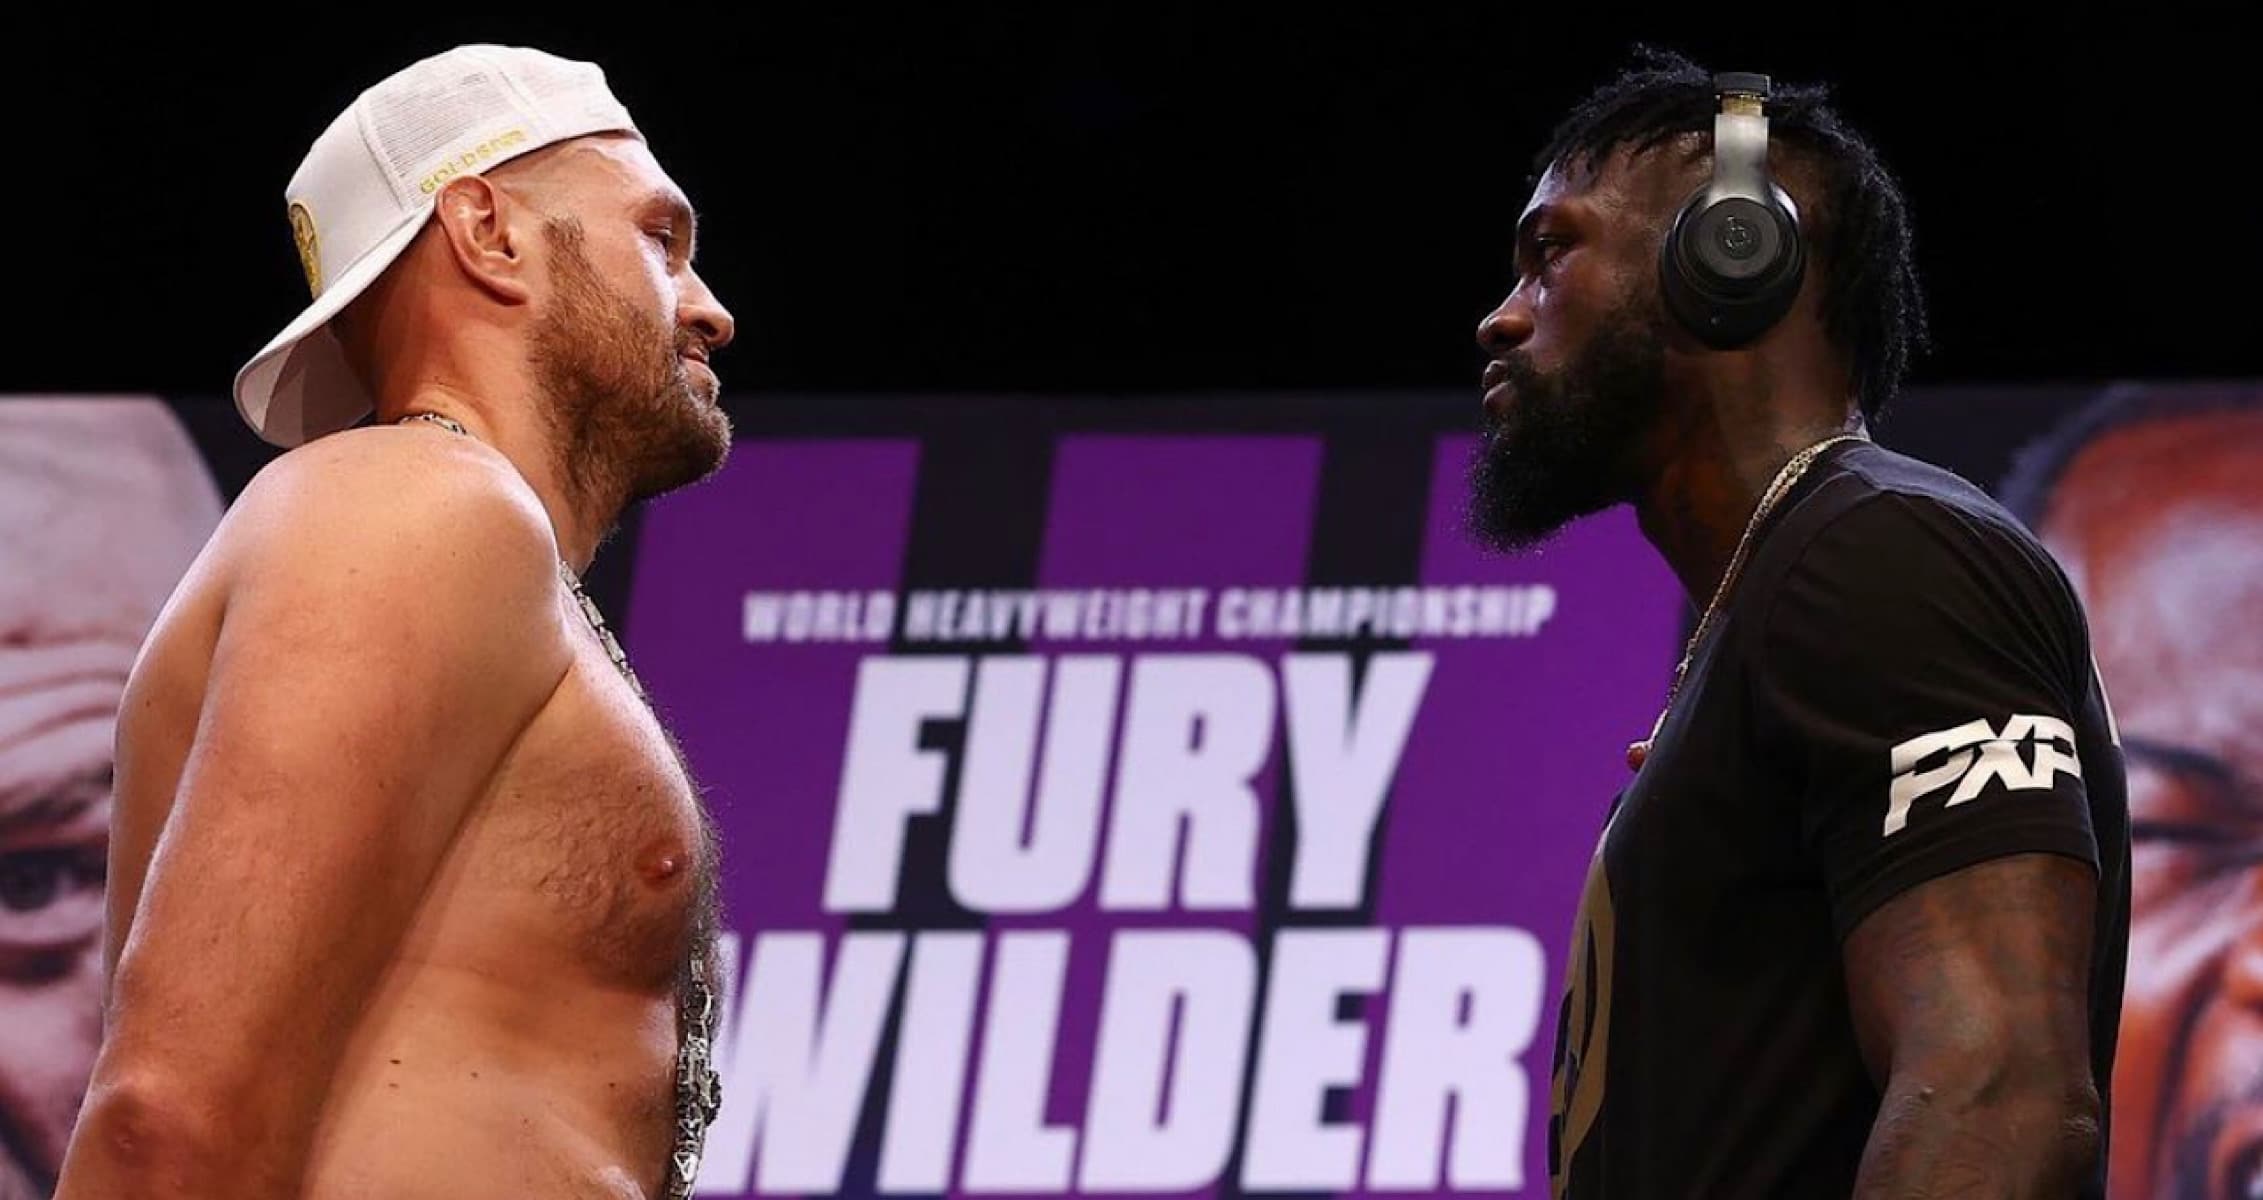 Tyson Fury vs Deontay Wilder 3 Postponed After Fury Tests Positive For COVID-19